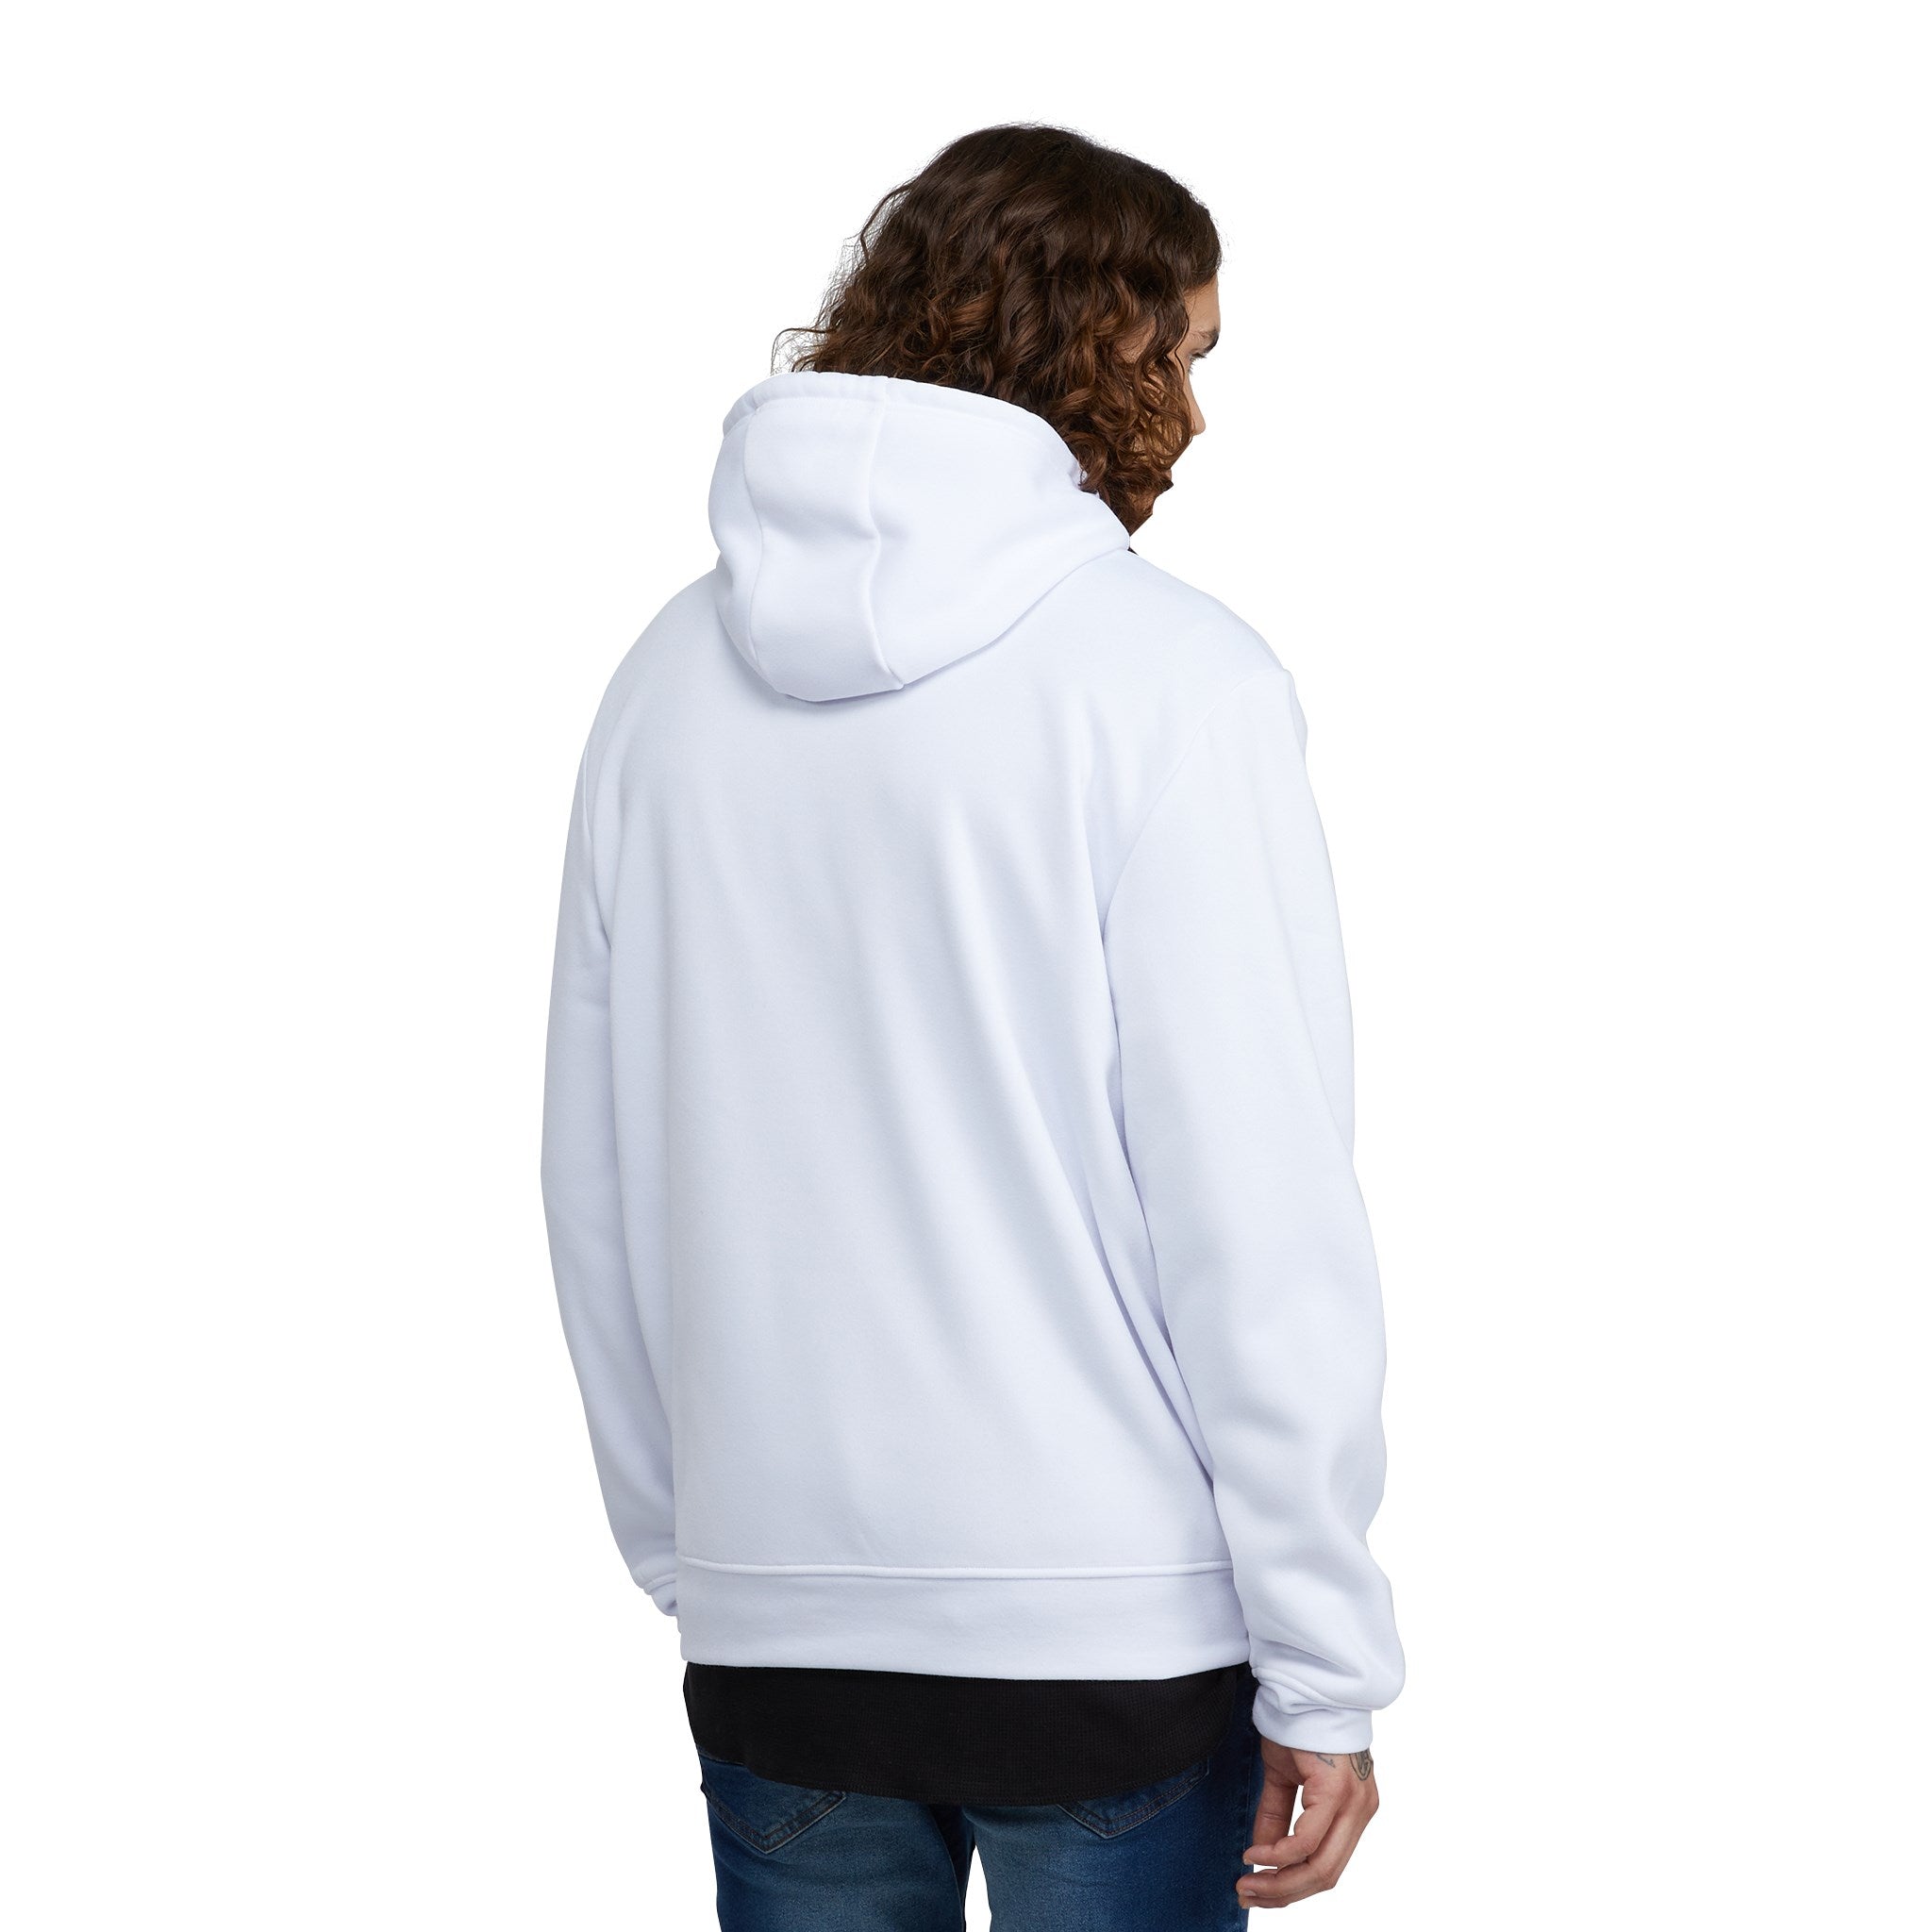 Headfirst Pullover Hoodie